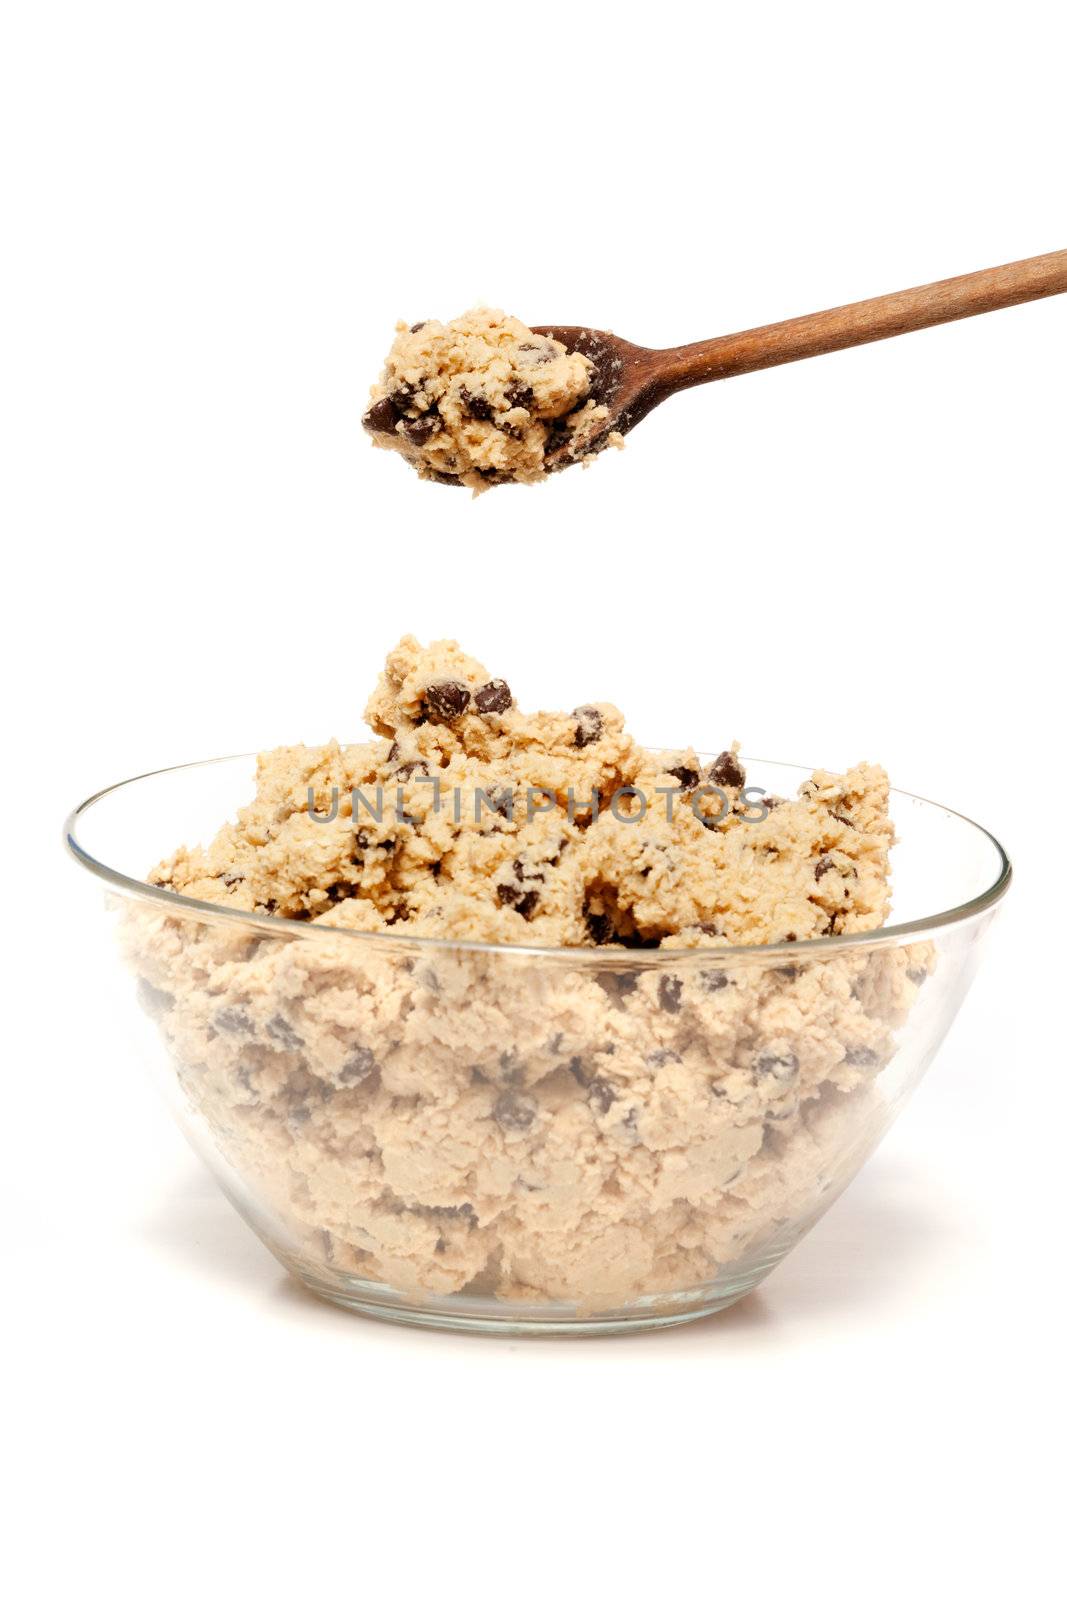 A bowl of raw chocolate chip cookie dough